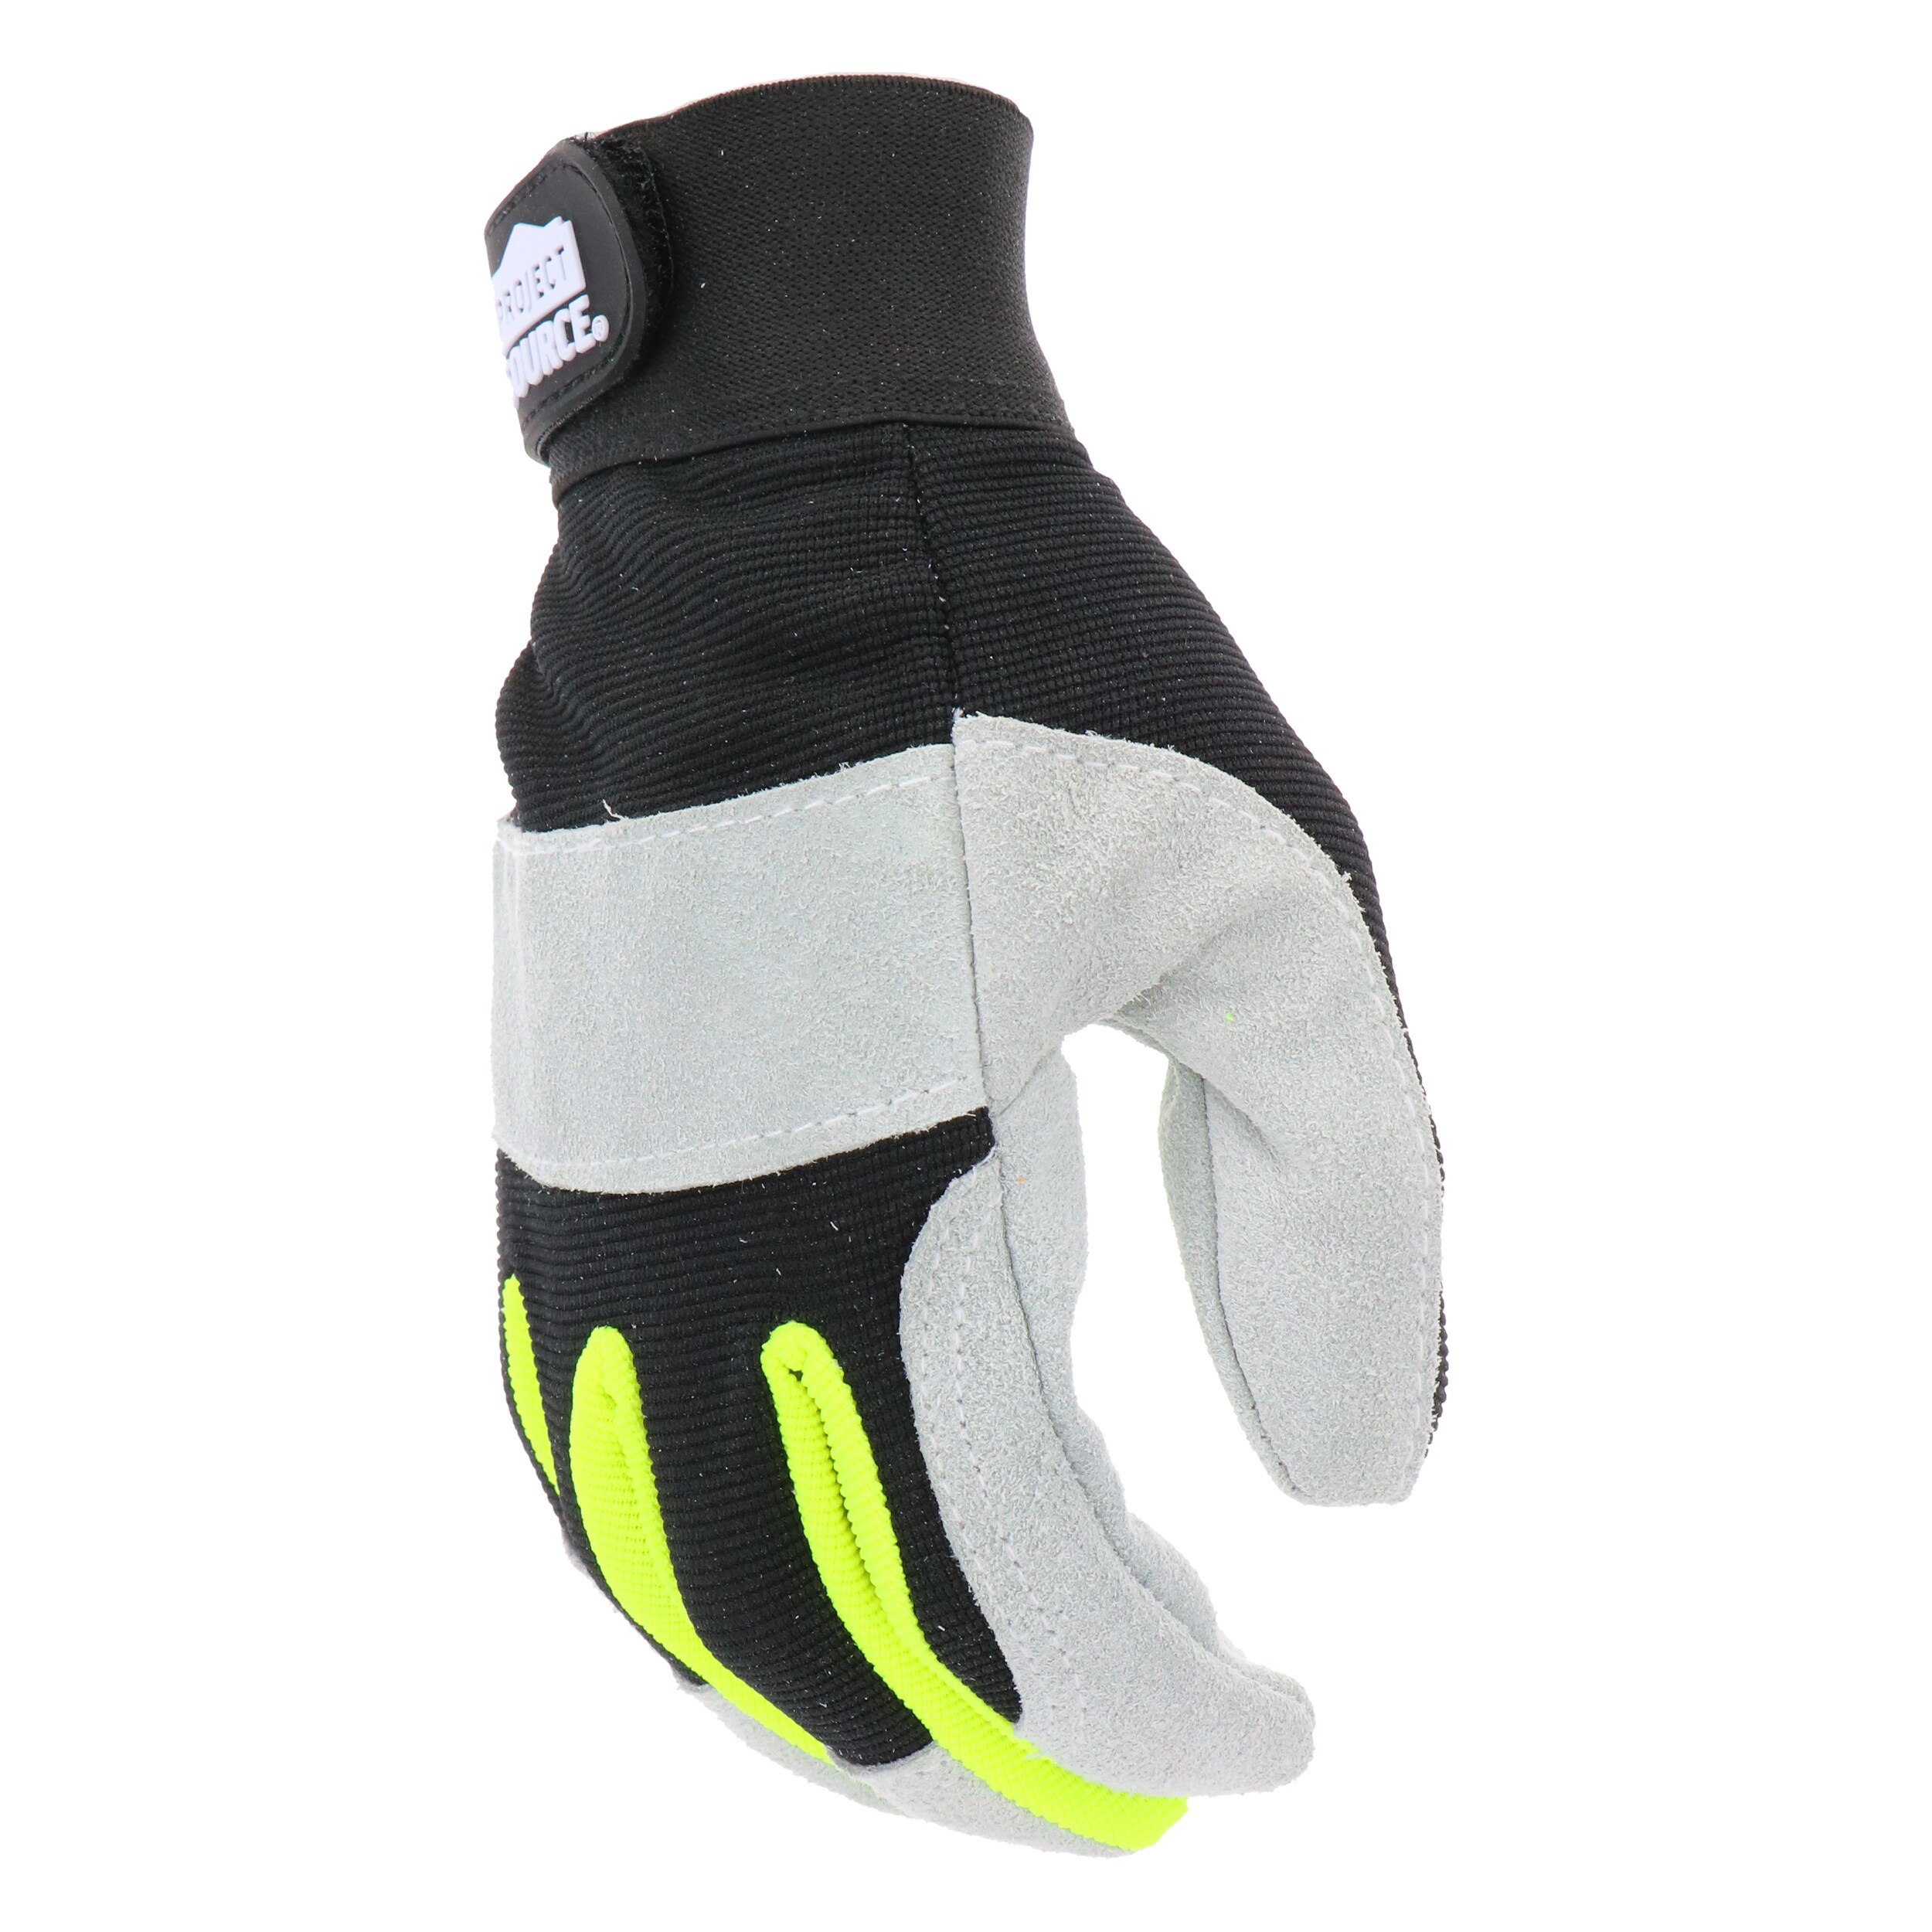 Blue Hawk 3-Pack Large Male Polyester Leather Palm Work Gloves Model #LW86156-L3P